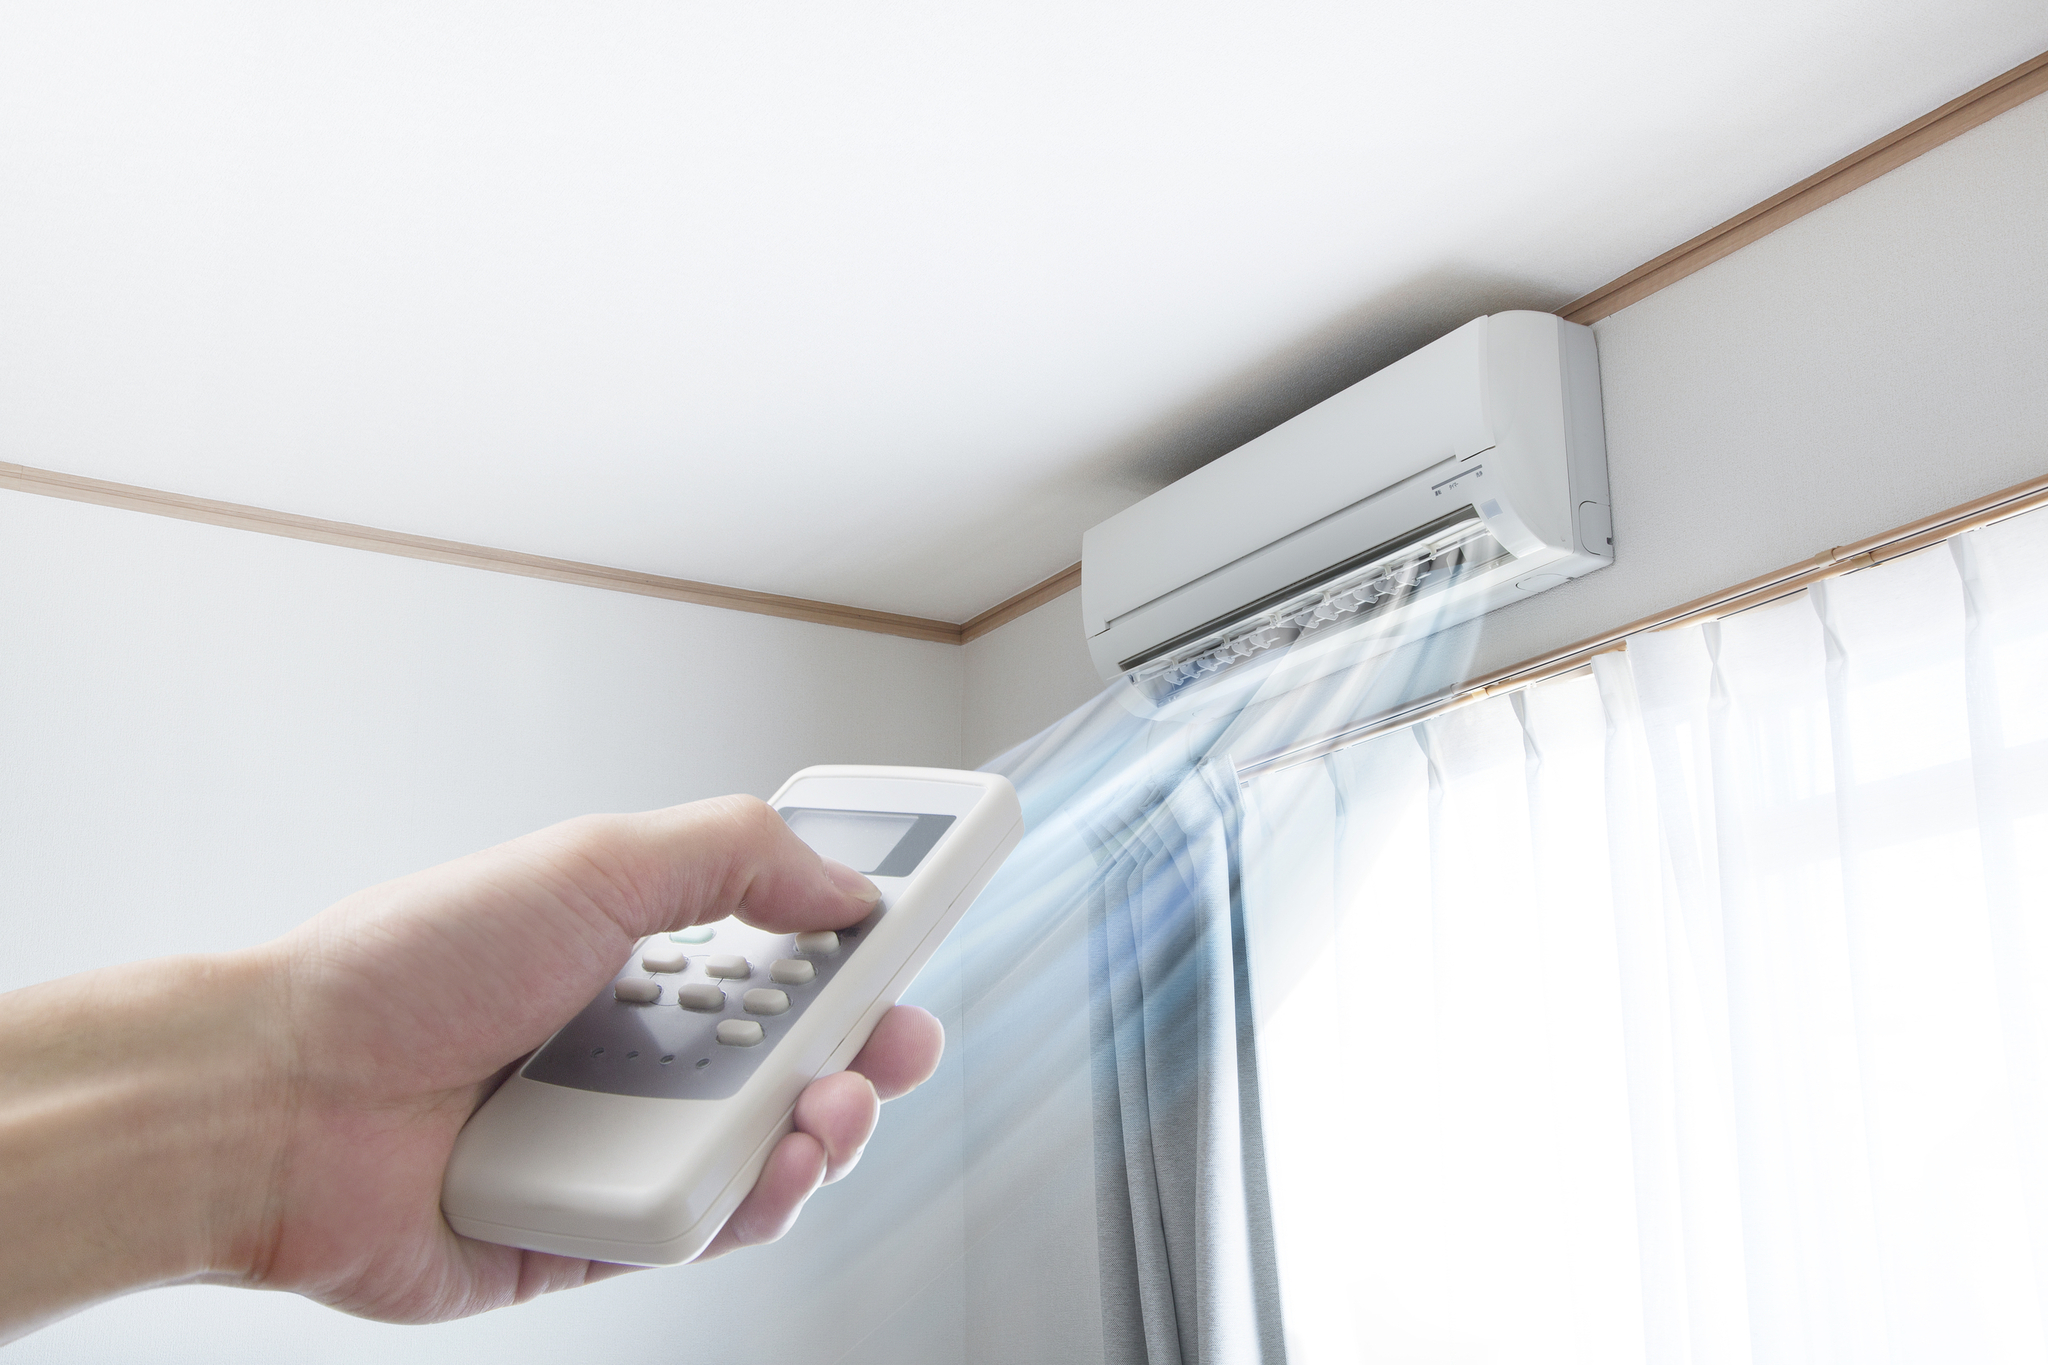 A woman’s hand pointing a remote at a ductless AC unit mounted on a wall